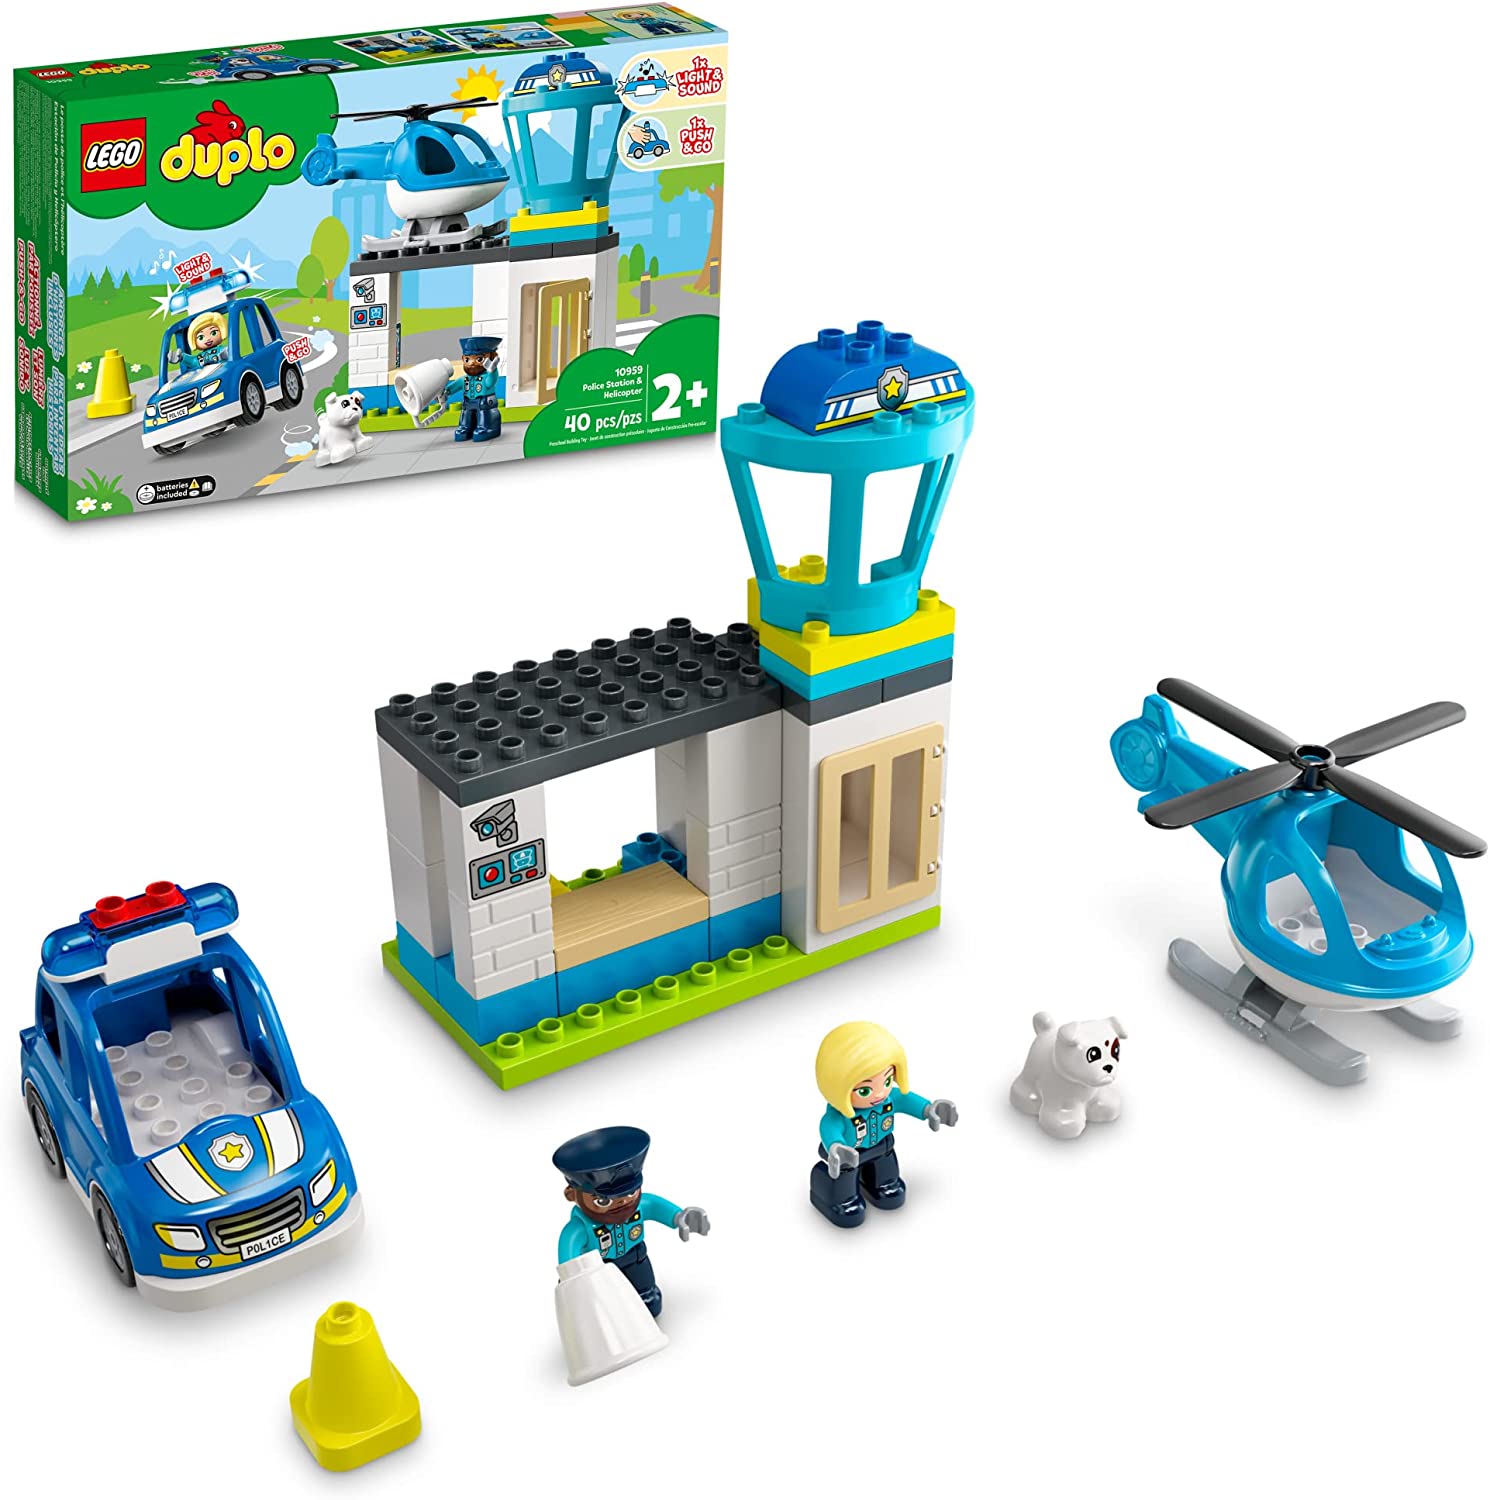 LEGO Duplo Town Police Station & Helicopter 10959 - LEGO, LEGO Duplo, LEGO Duplo Town